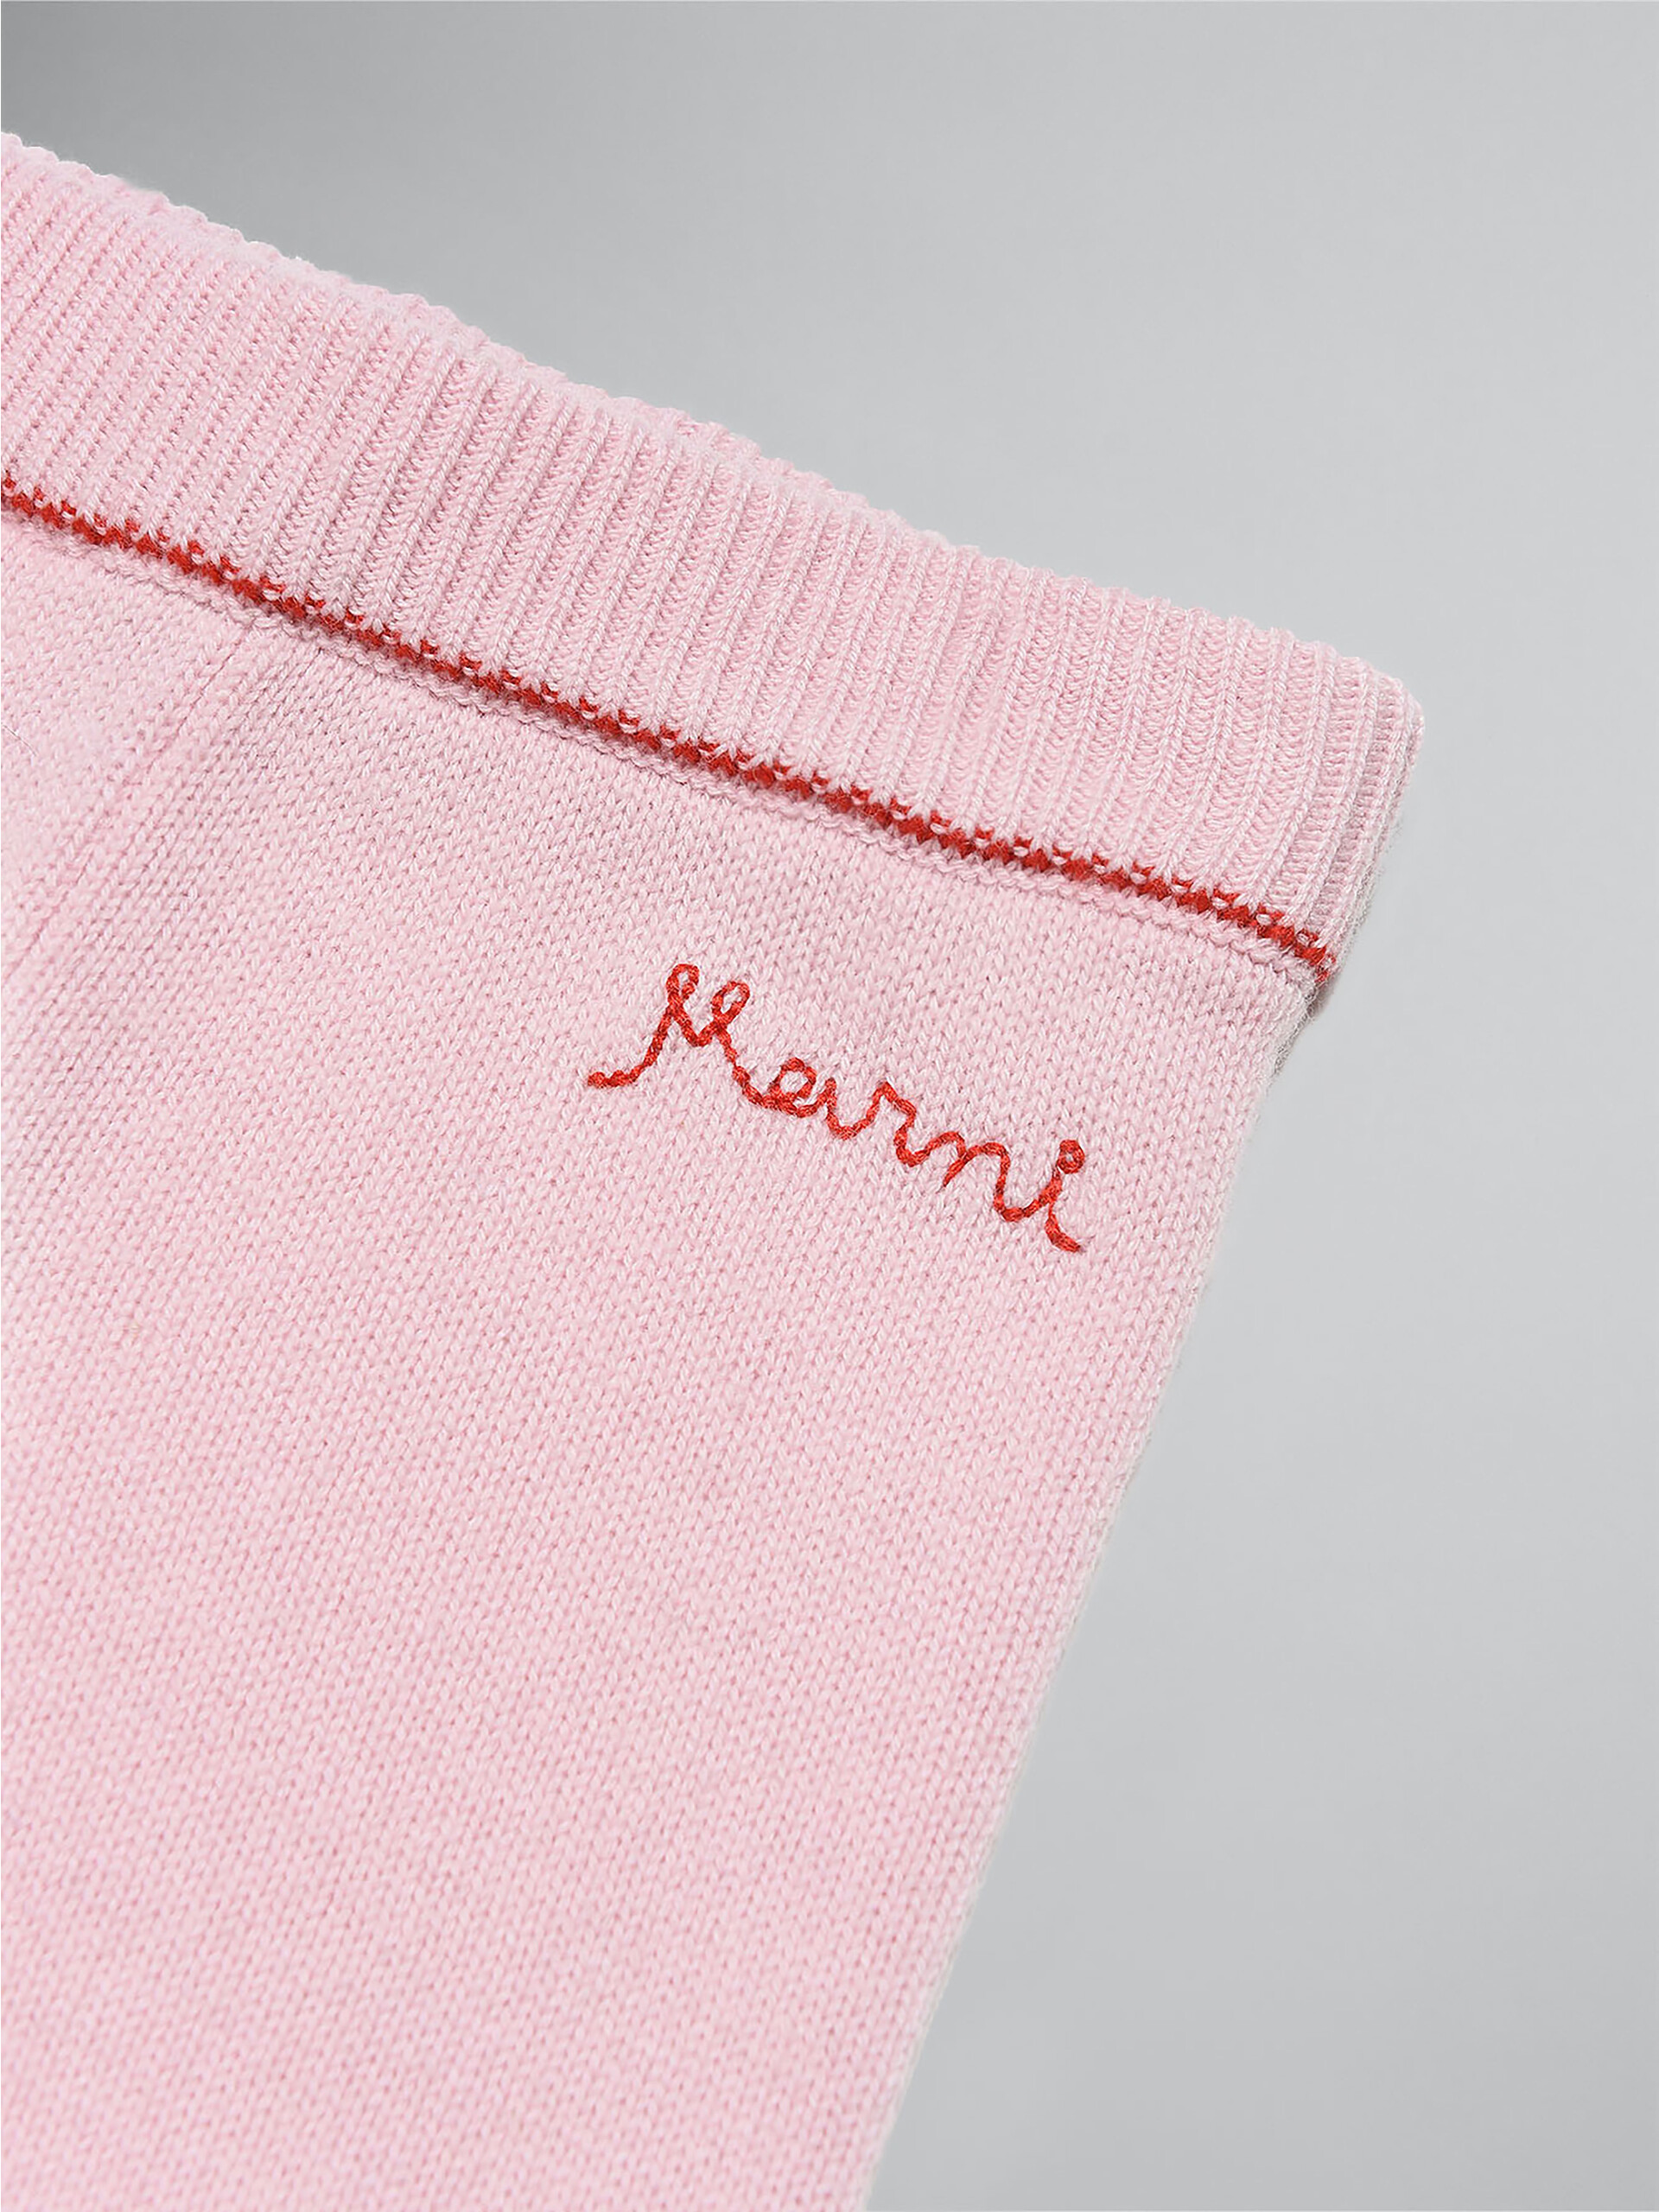 Pink wool and cashmere trousers with logo - Pants - Image 3